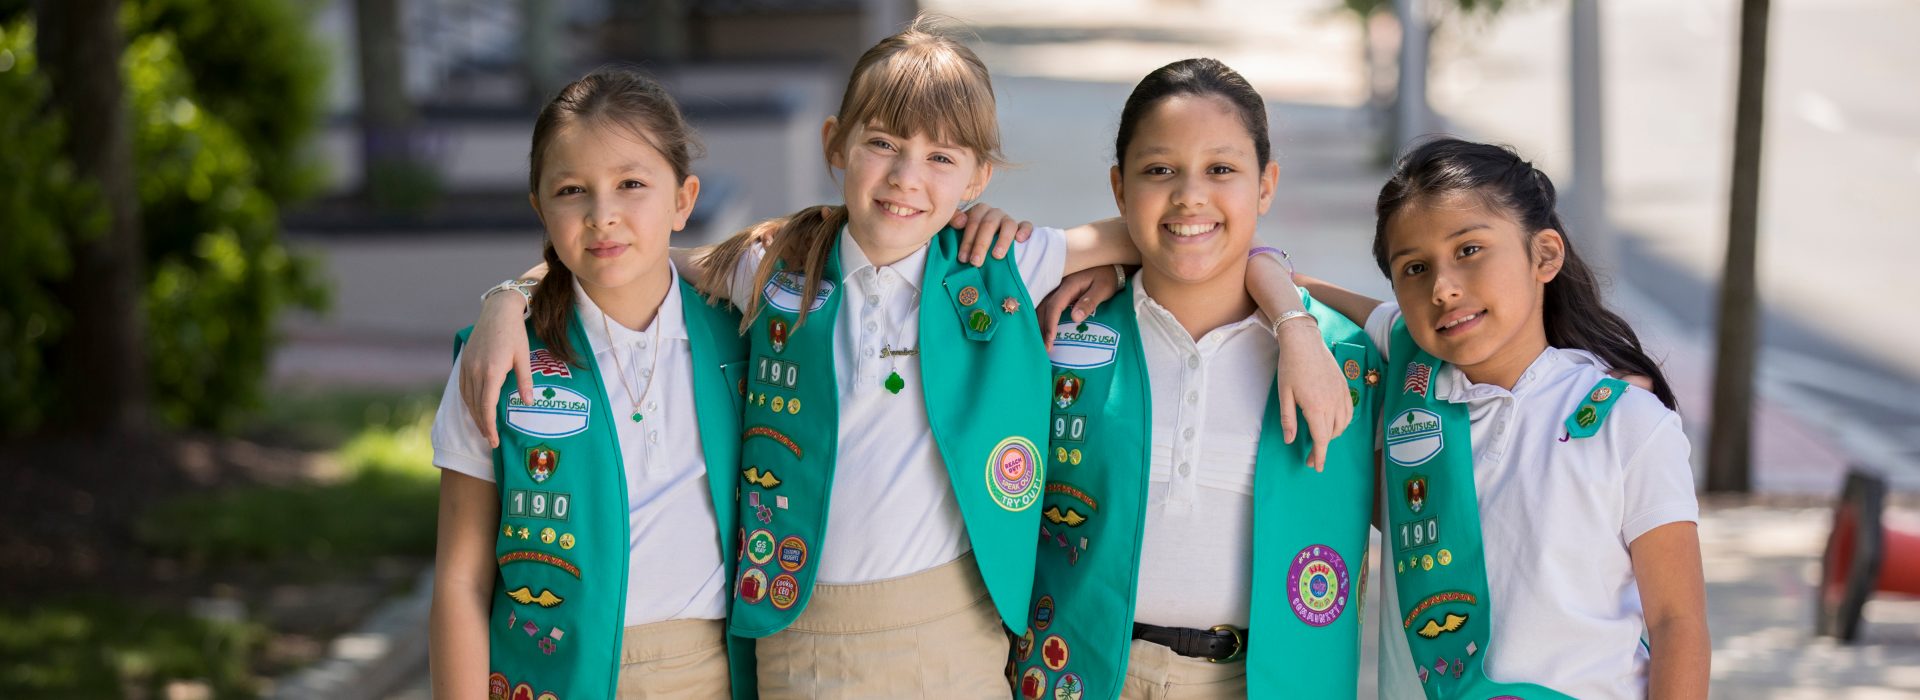  two girl scout juniors outside wearing junior vest uniform smiling and hugging 